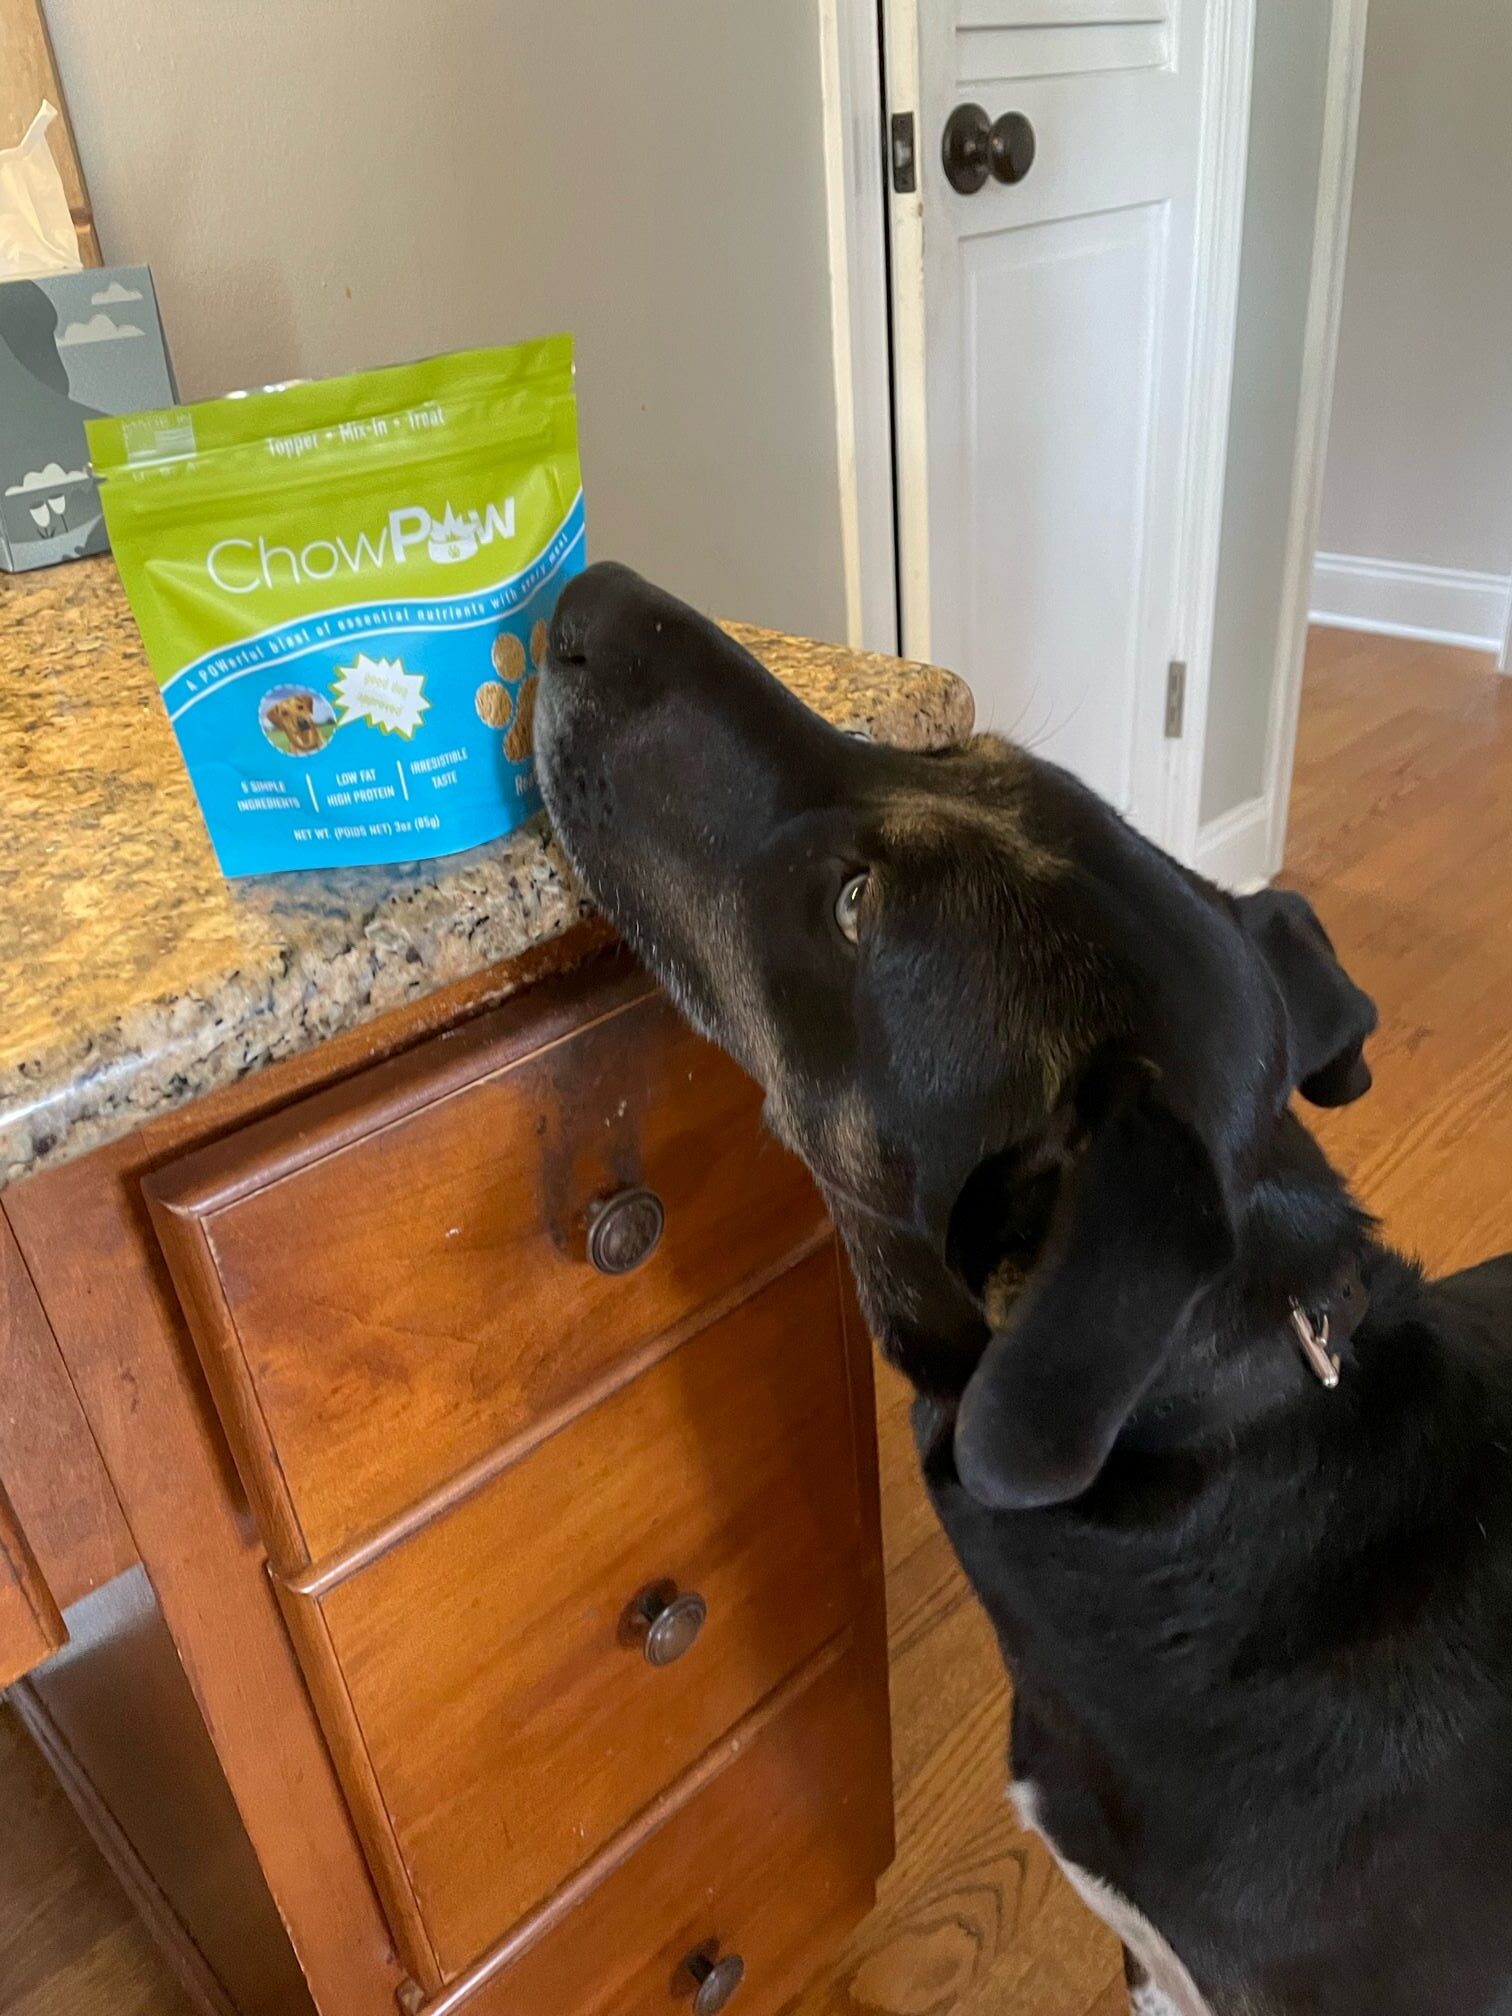 ChowPow - Adding Enhancement to your dogs diet